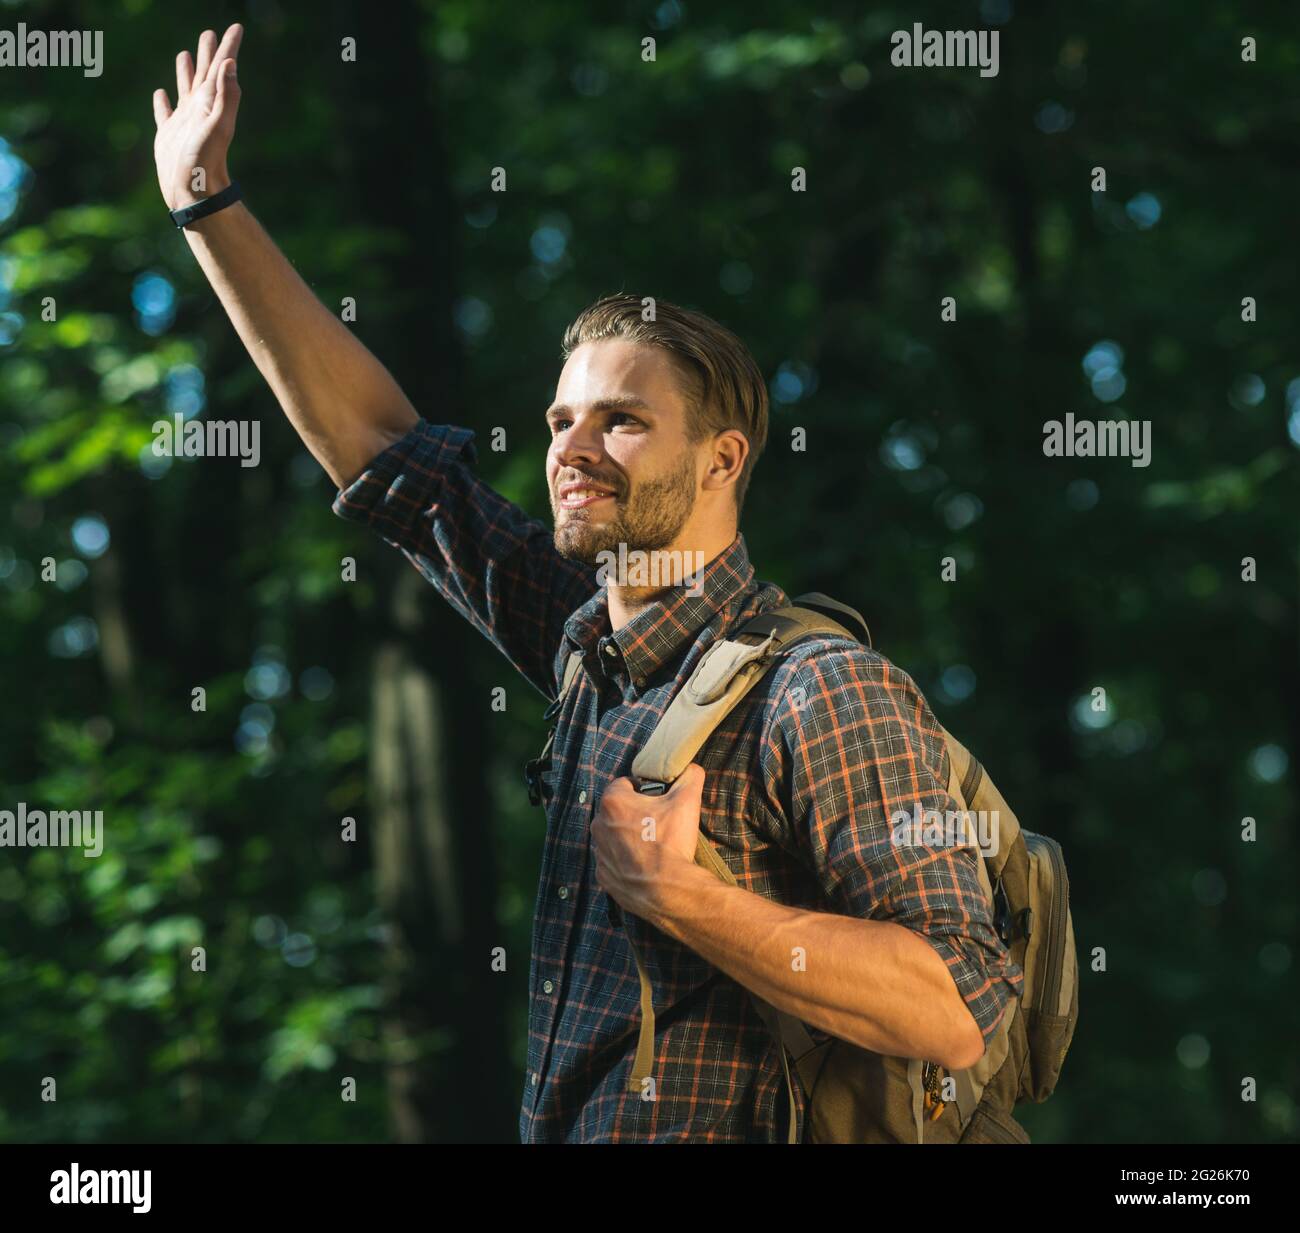 Happy traveler with backpack in woods. Travel, tourism, hike, adventure concept. Stock Photo